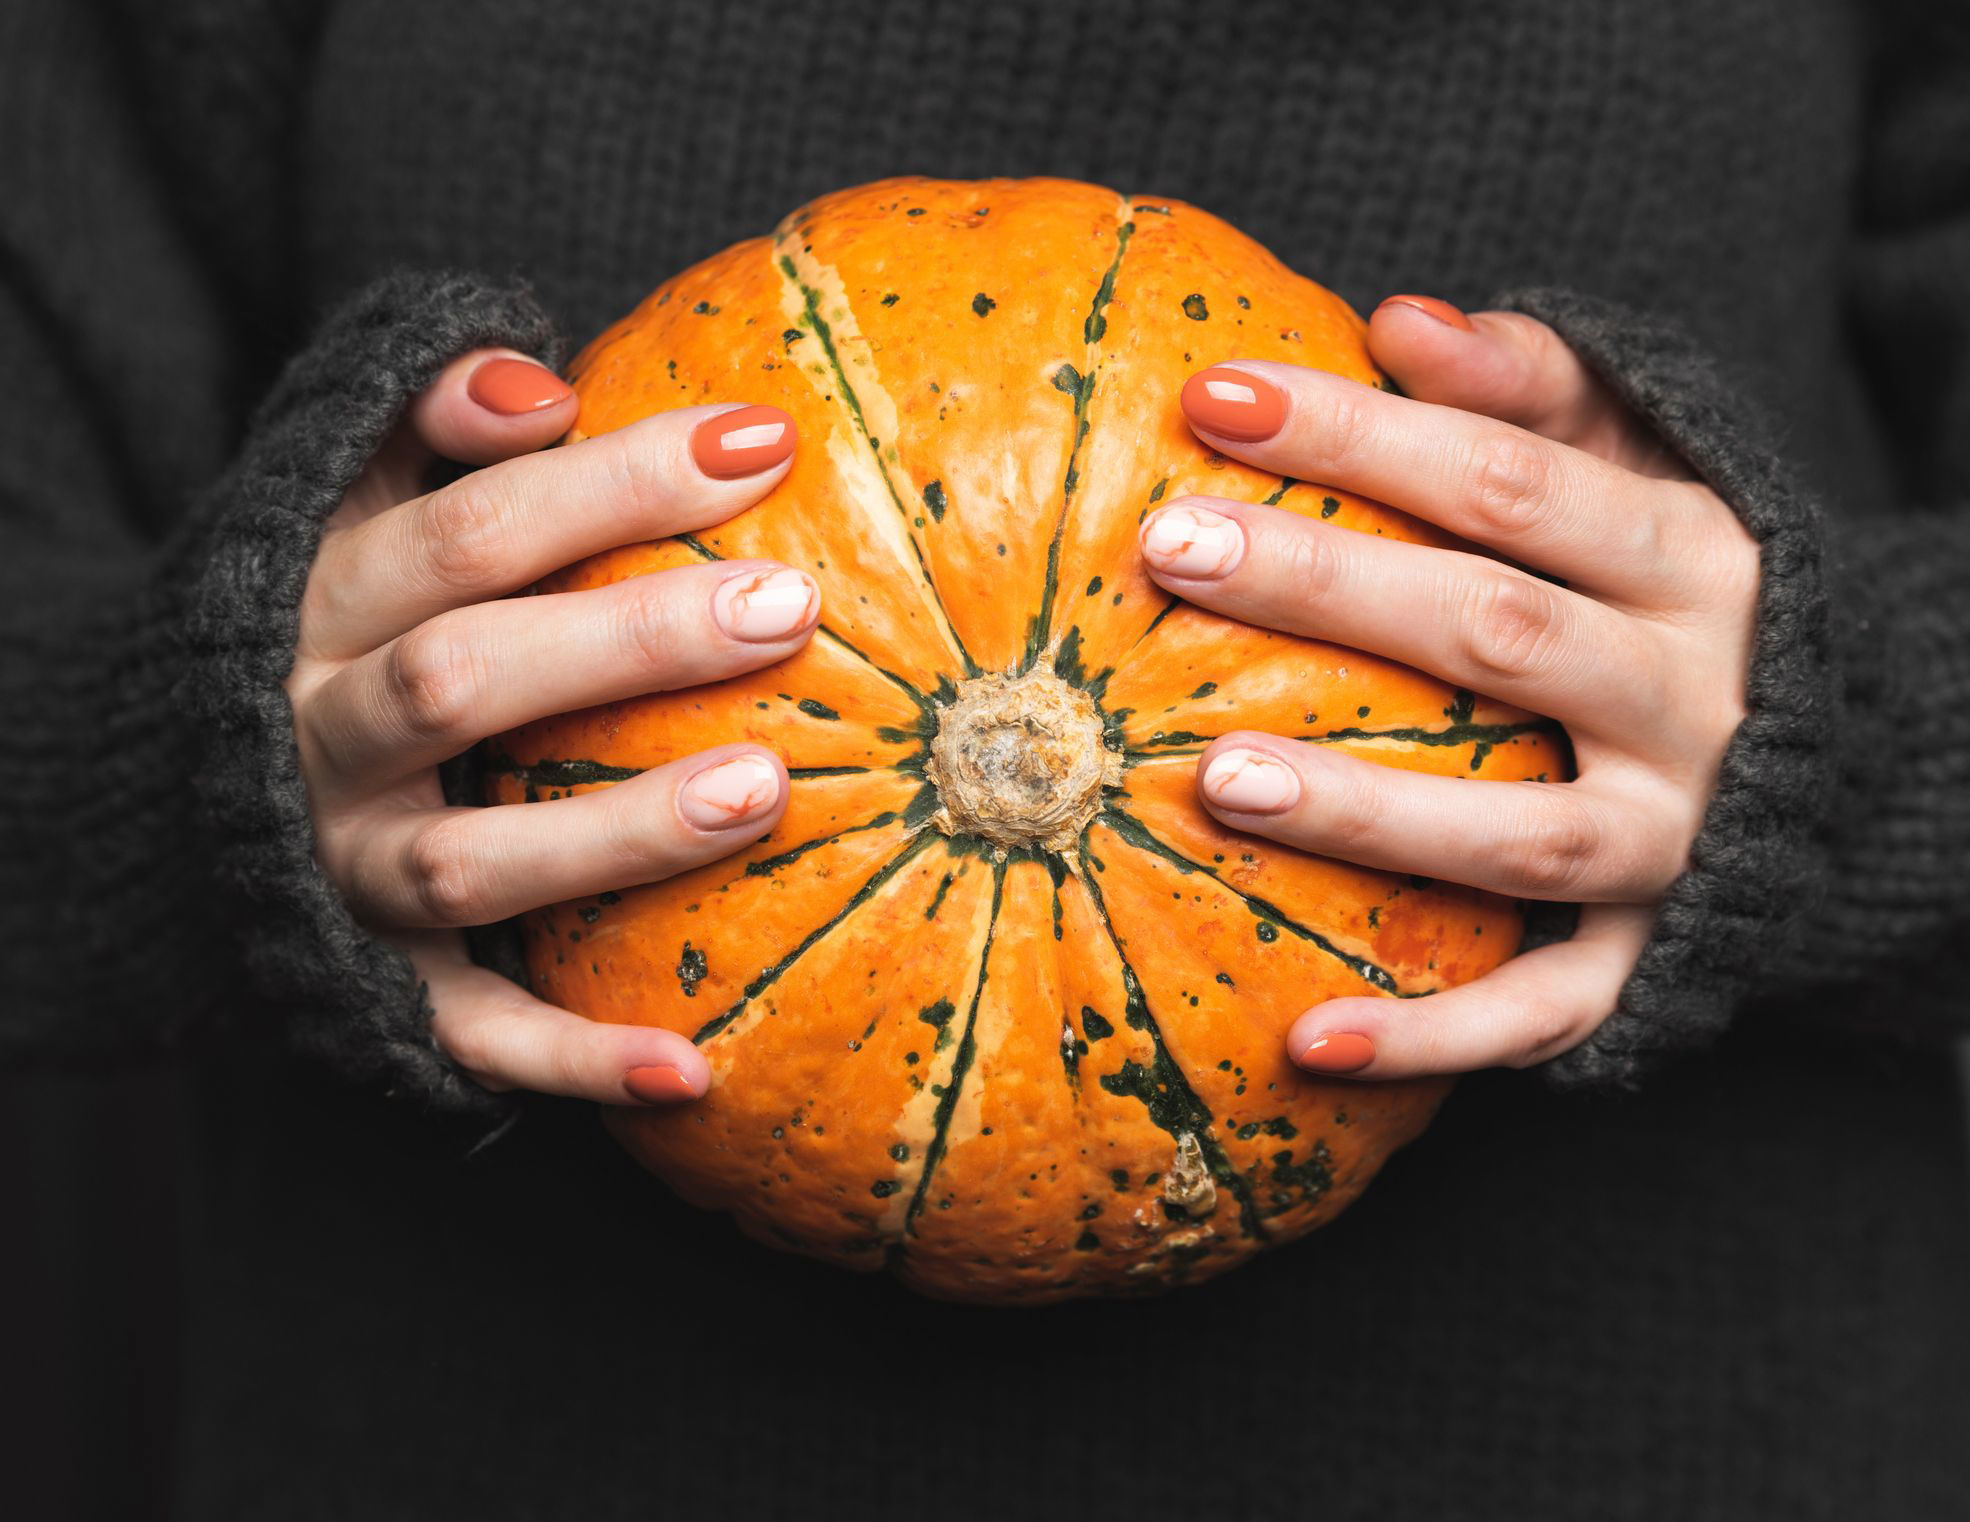 1. "10 Fall Nail Ideas That Will Make You Want to Book a Manicure ASAP" - wide 2